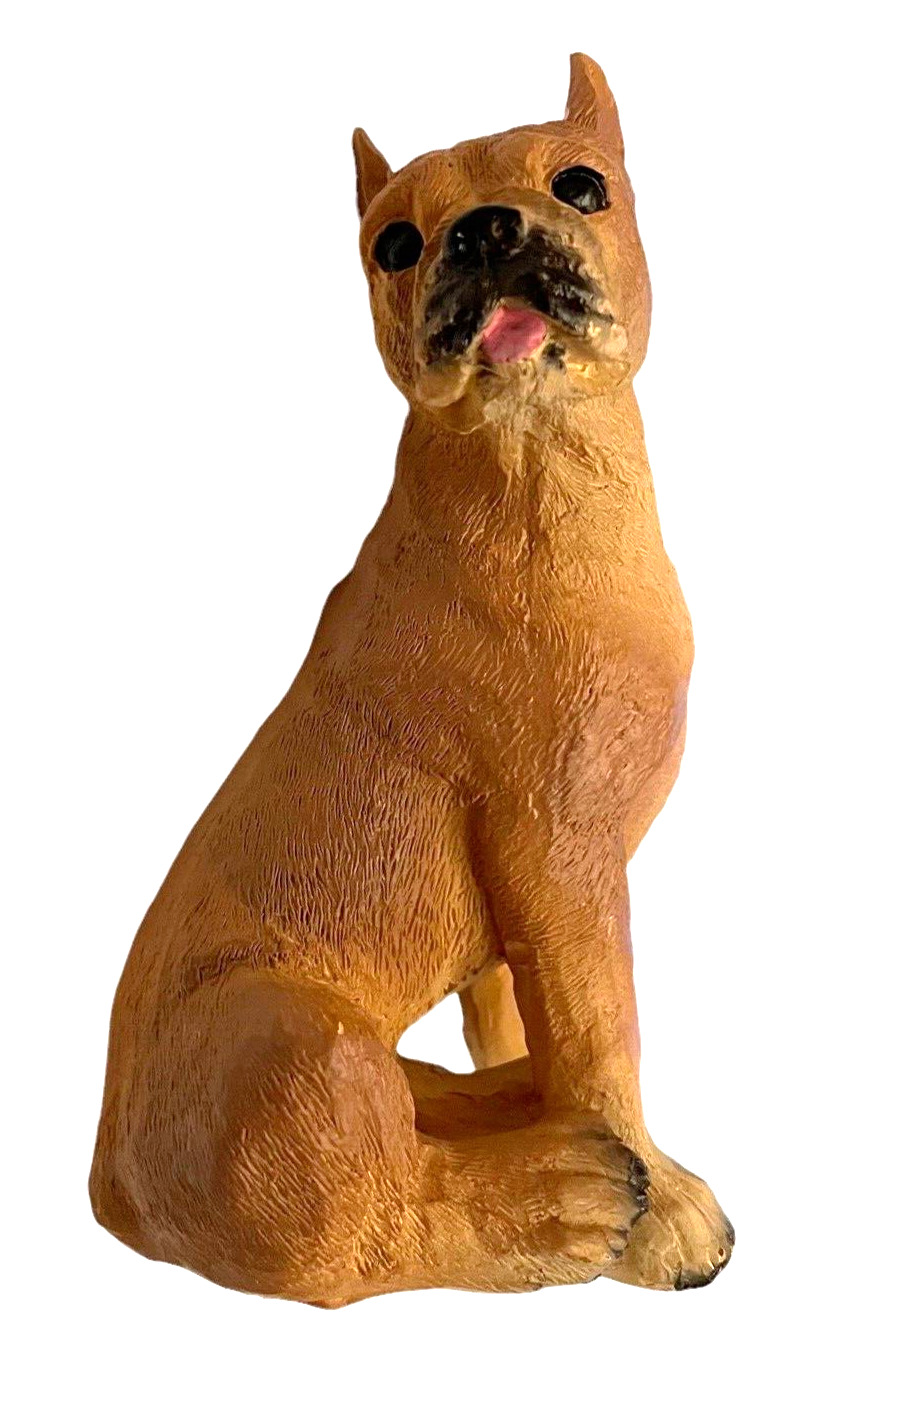 Ceramic Boxer Dog Figurine Realistic Sitting with Tongue Out Pet Home Decor